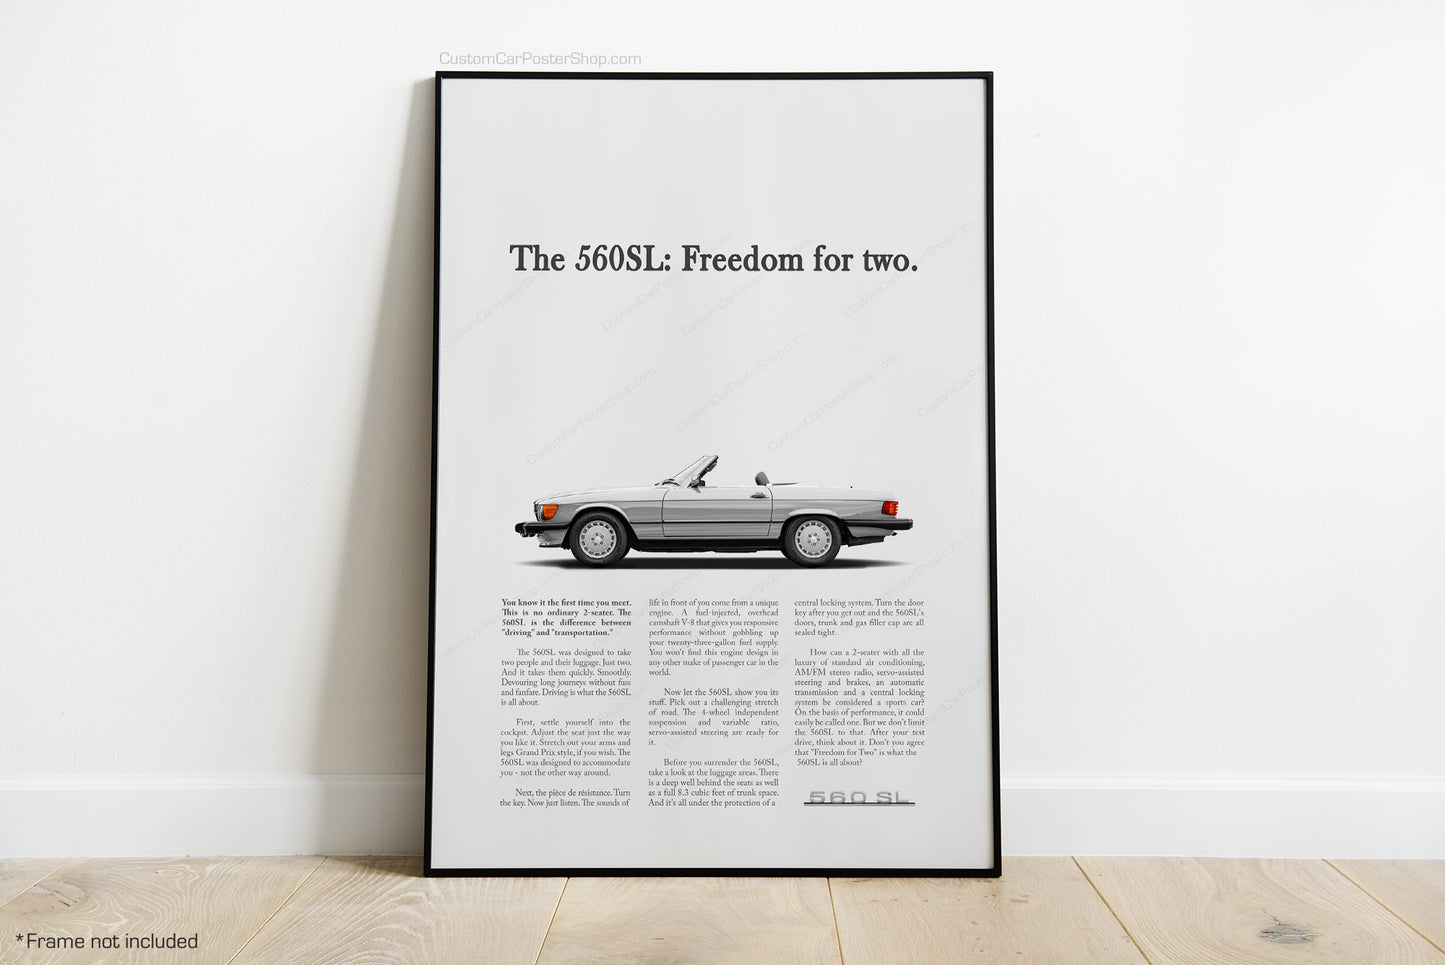 Mercedes-Benz 560SL Vintage Print Ad - Freedom for Two